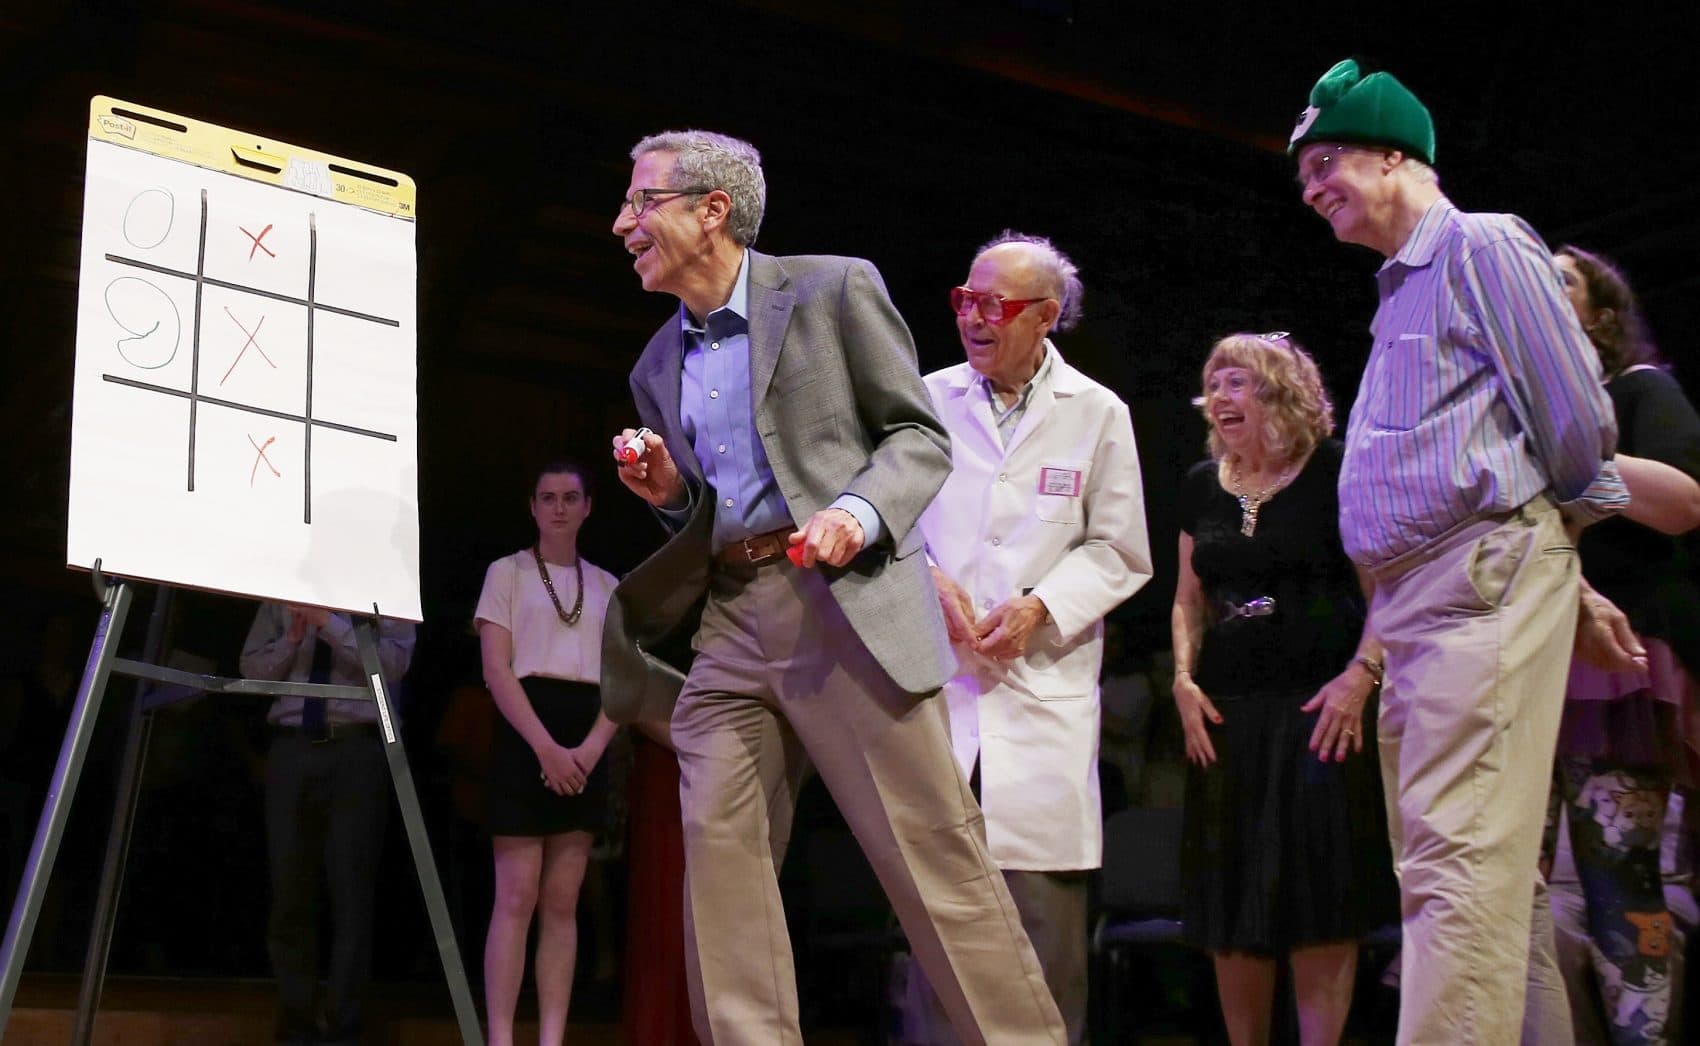 Nobel laureates Rich Roberts (physiology or medicine, 1993), right, Dudley Herschbach (chemistry, 1986) third from right, and Eric Maskin (economics, 2007), second from left, compete in a game of &quot;tic-toc-toe&quot; with a brain surgeon during the Ig Nobel award ceremonies. (Michael Dwyer/AP)